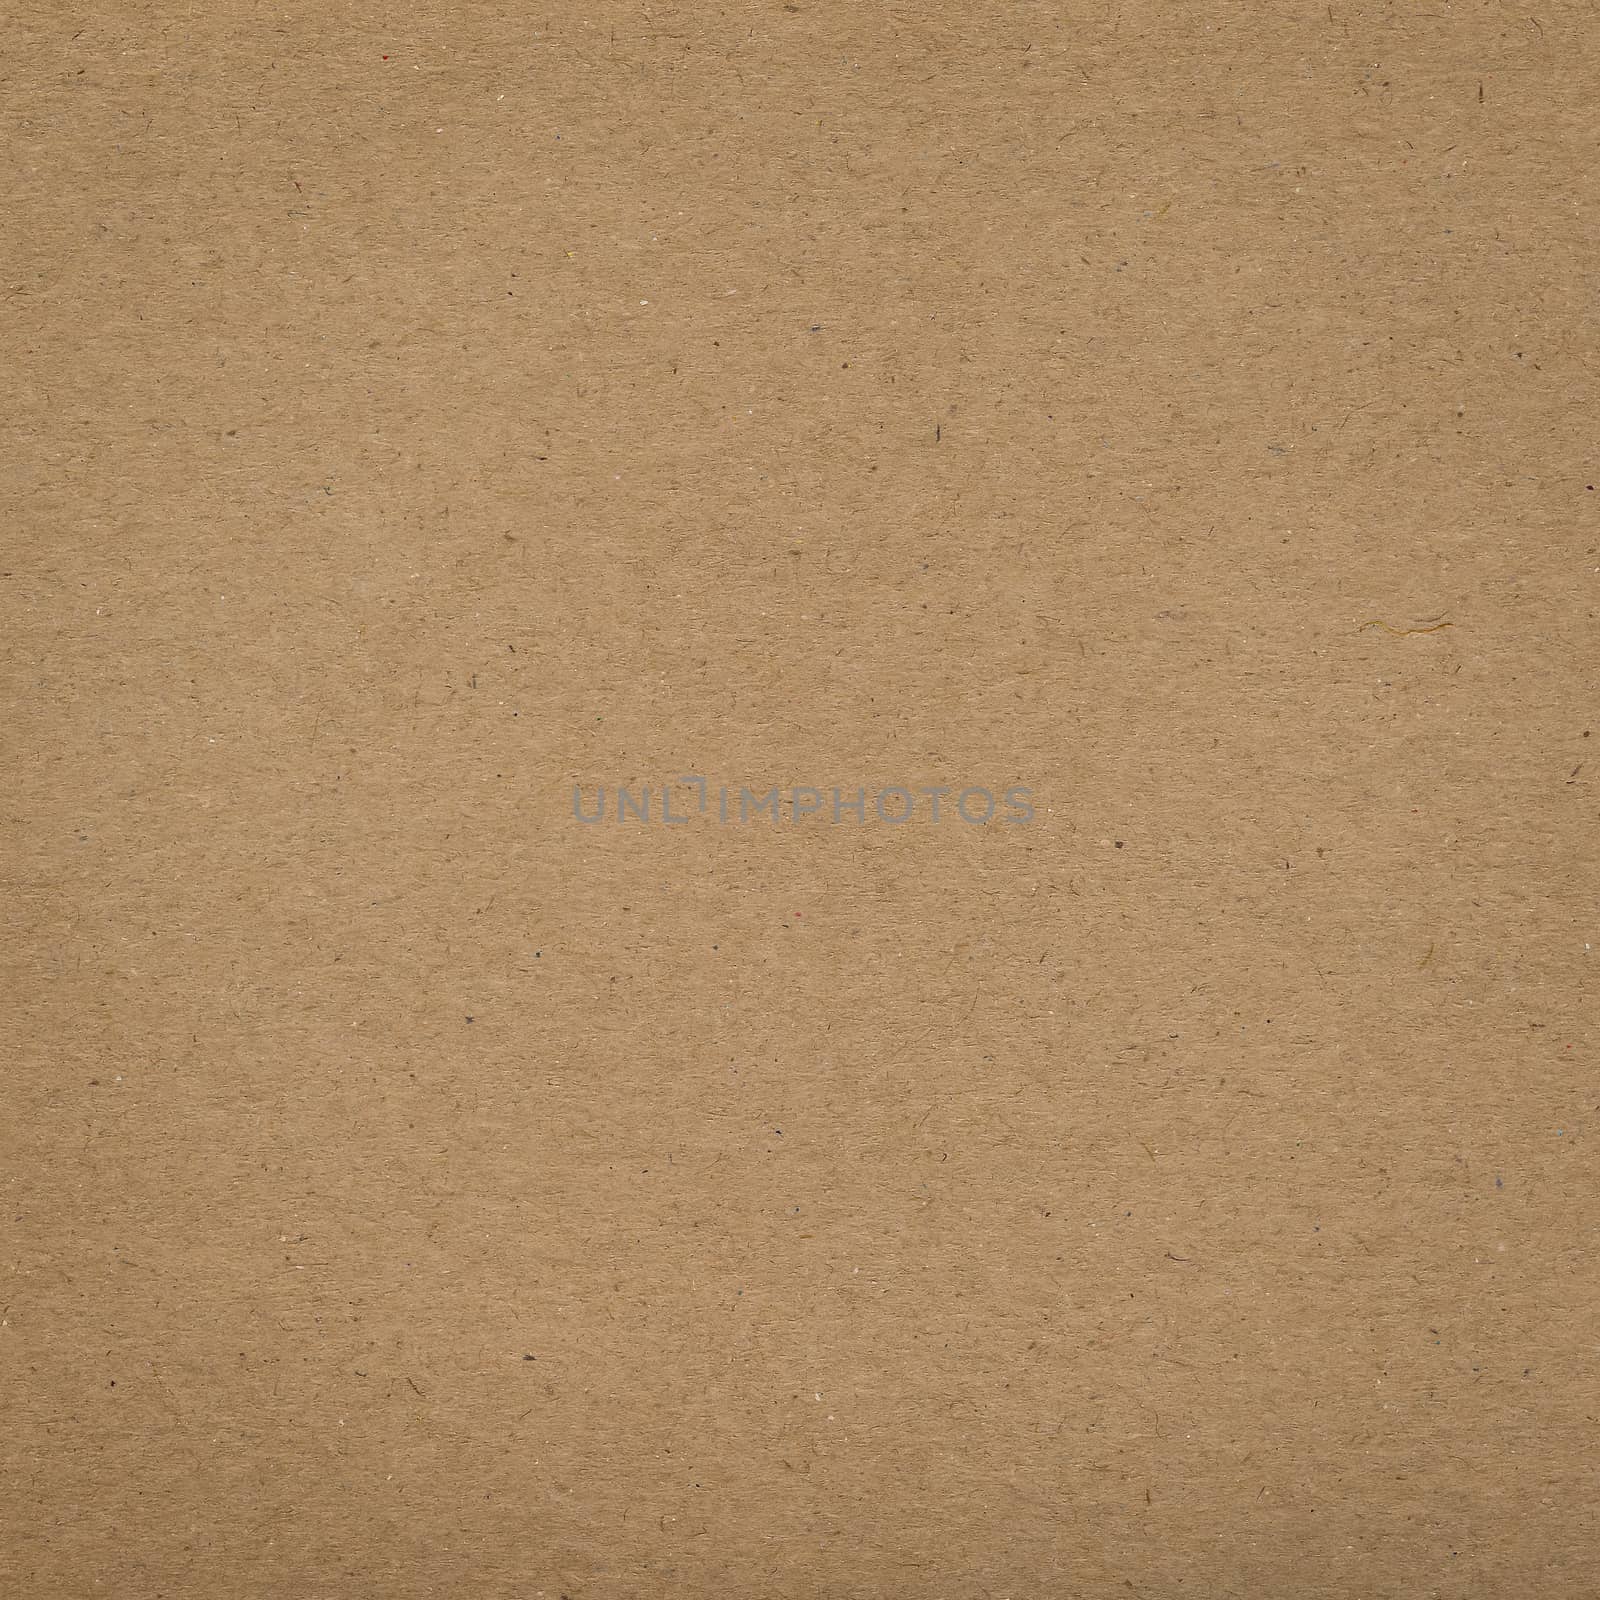 texture of old brown paper with vignette in square shaped, use for background